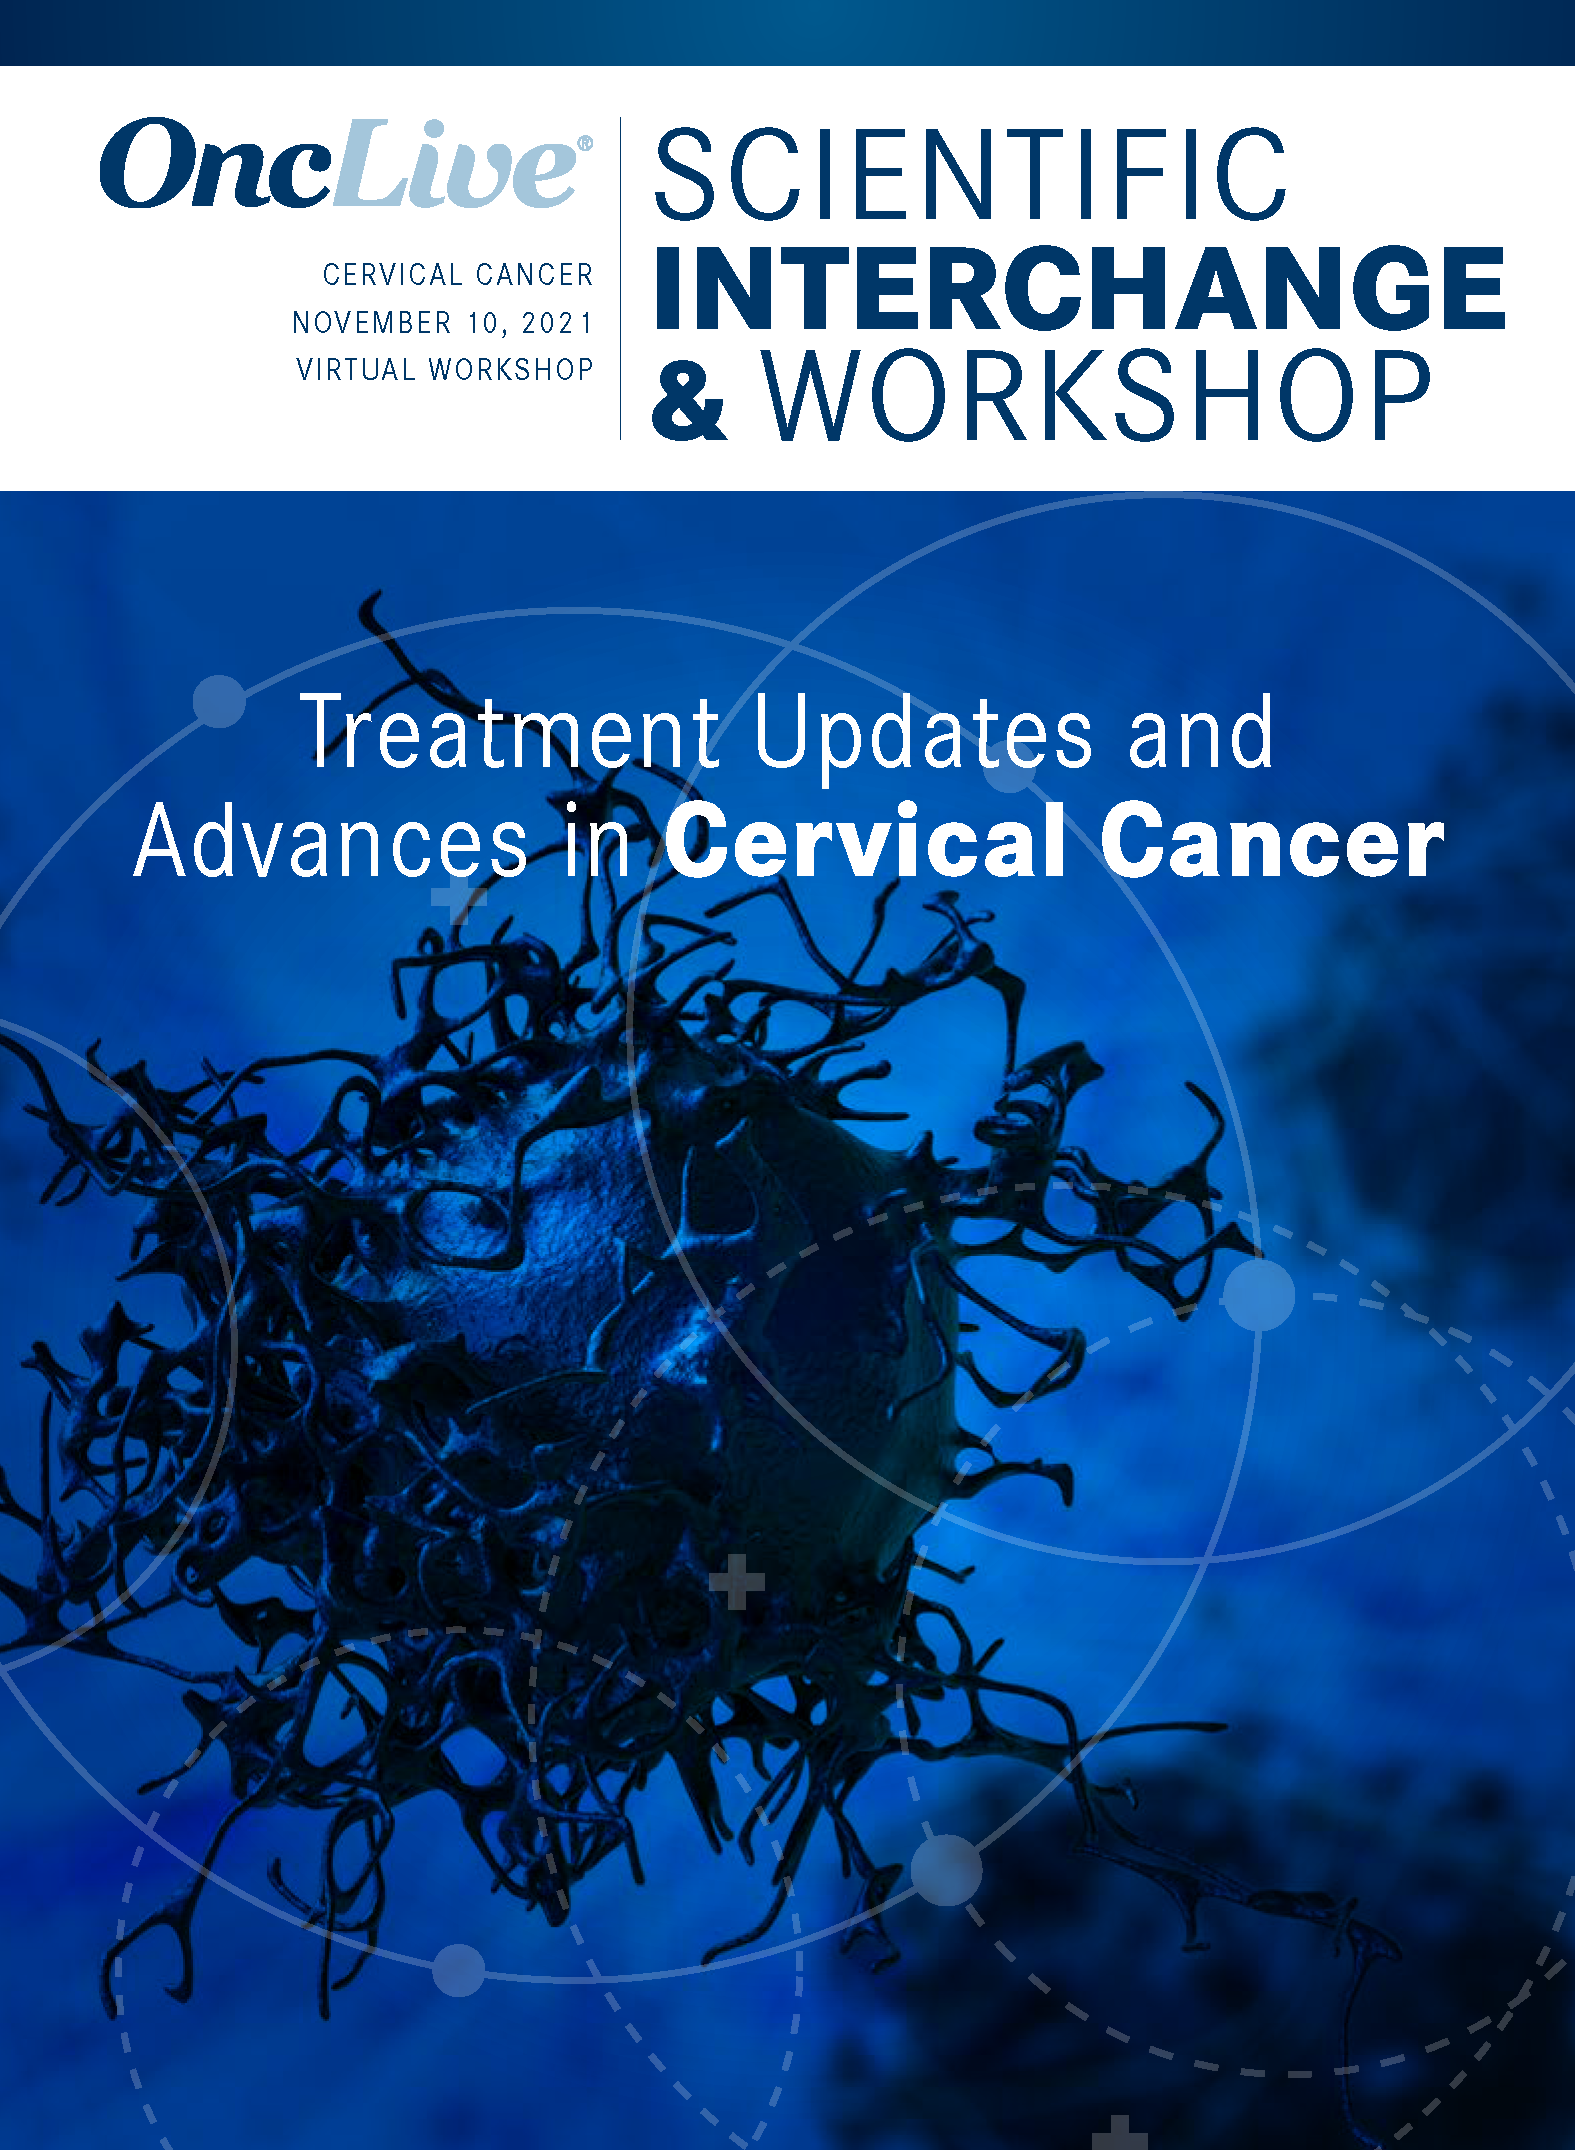 Treatment Updates and Advances in Cervical Cancer